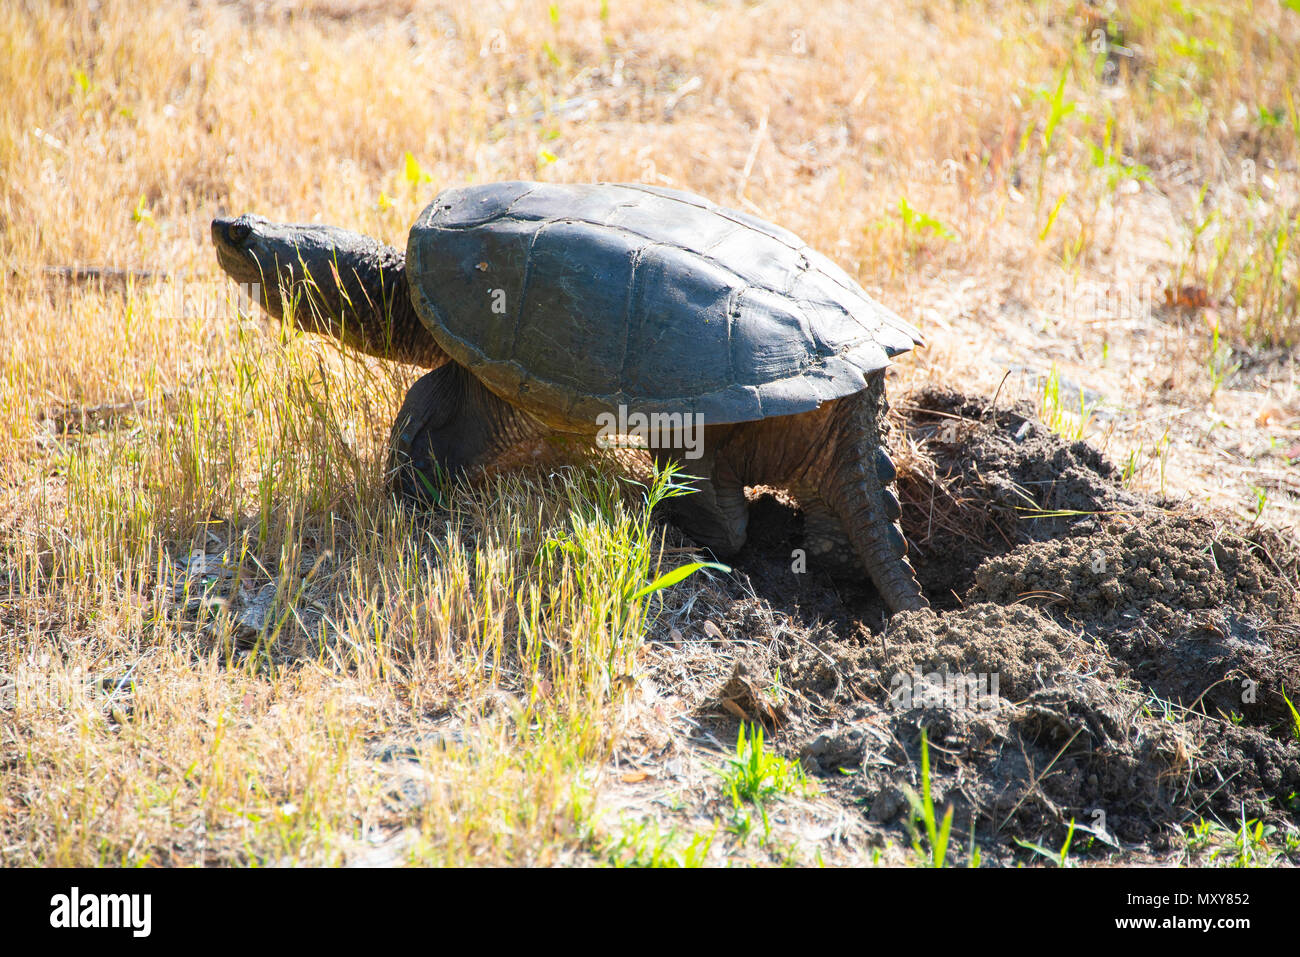 Snapping Turtle Stock Photo